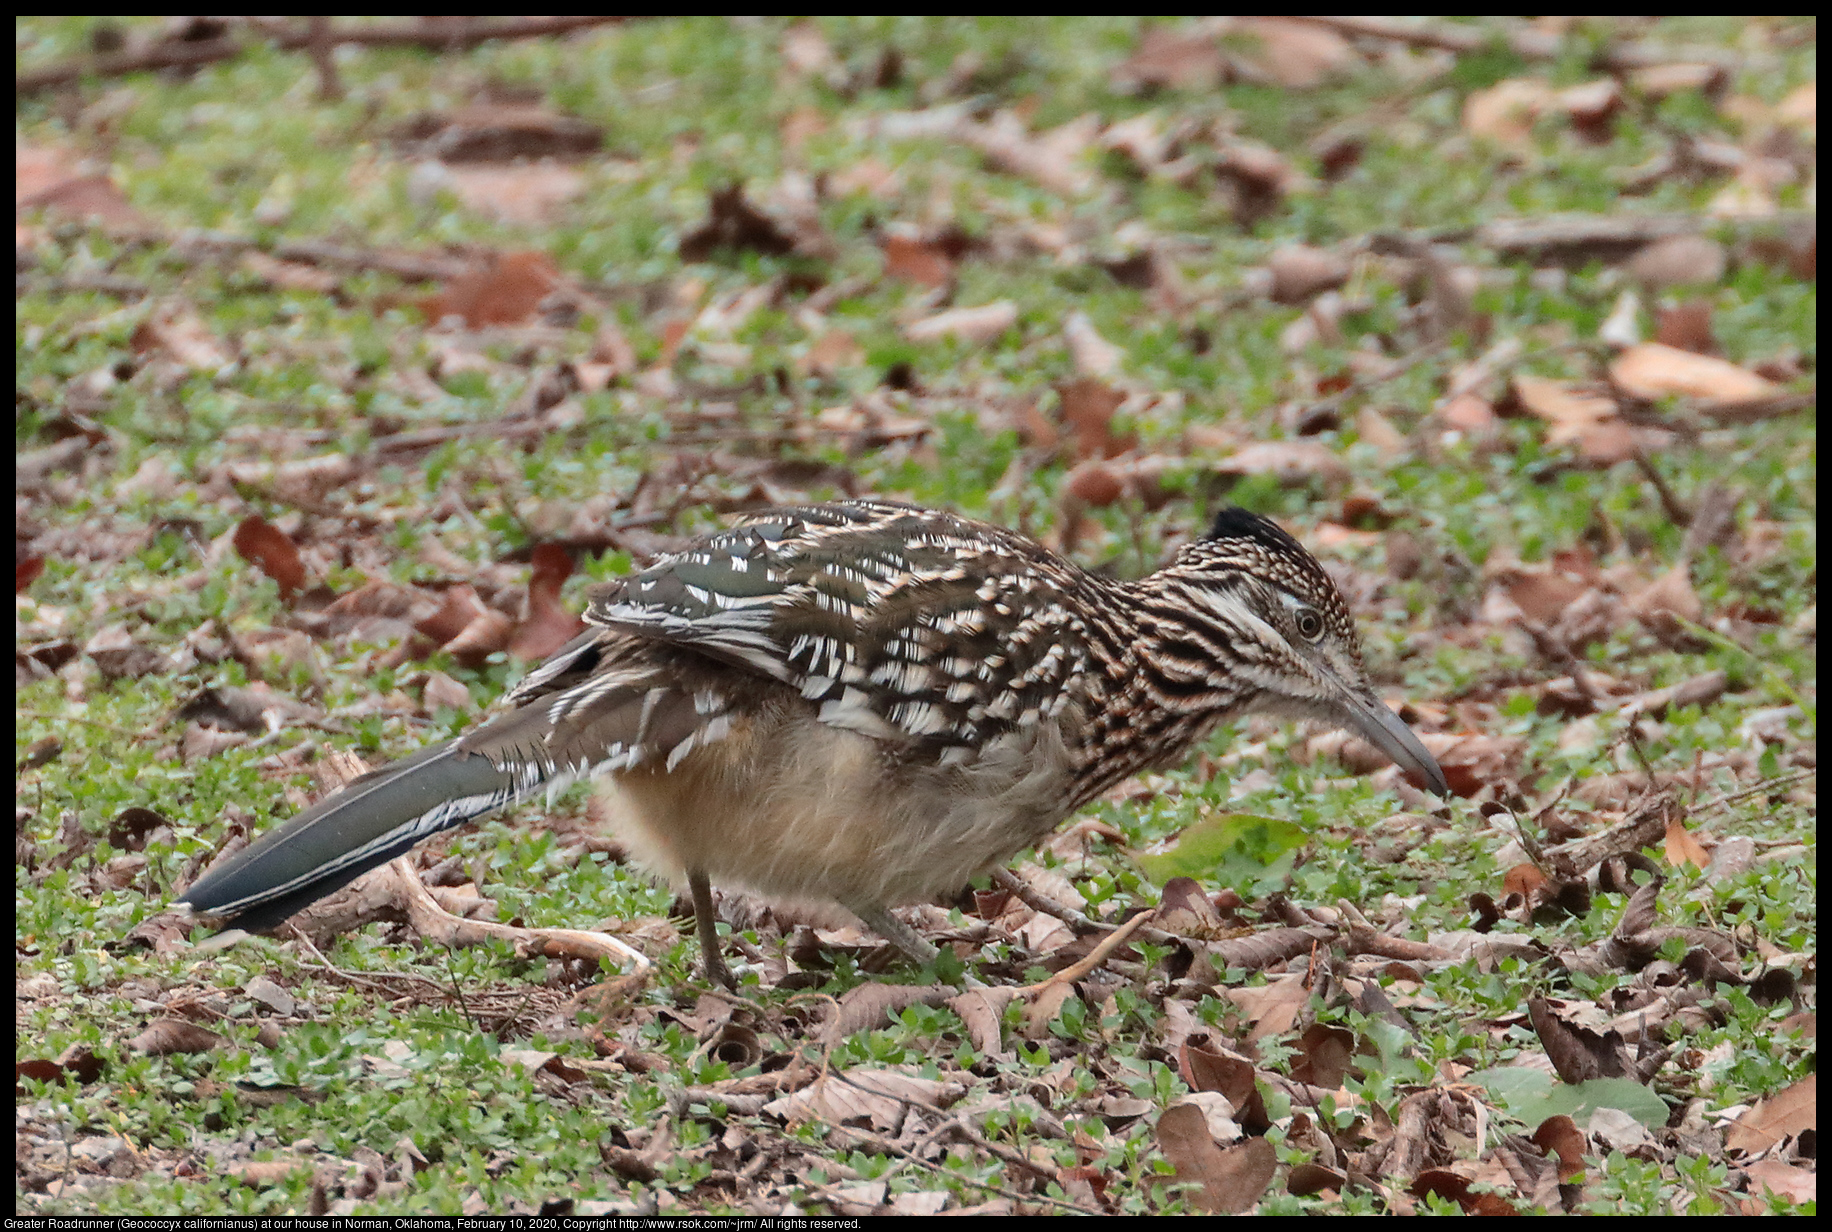 Greater Roadrunner (Geococcyx californianus) at our house in Norman, Oklahoma, February 10, 2020